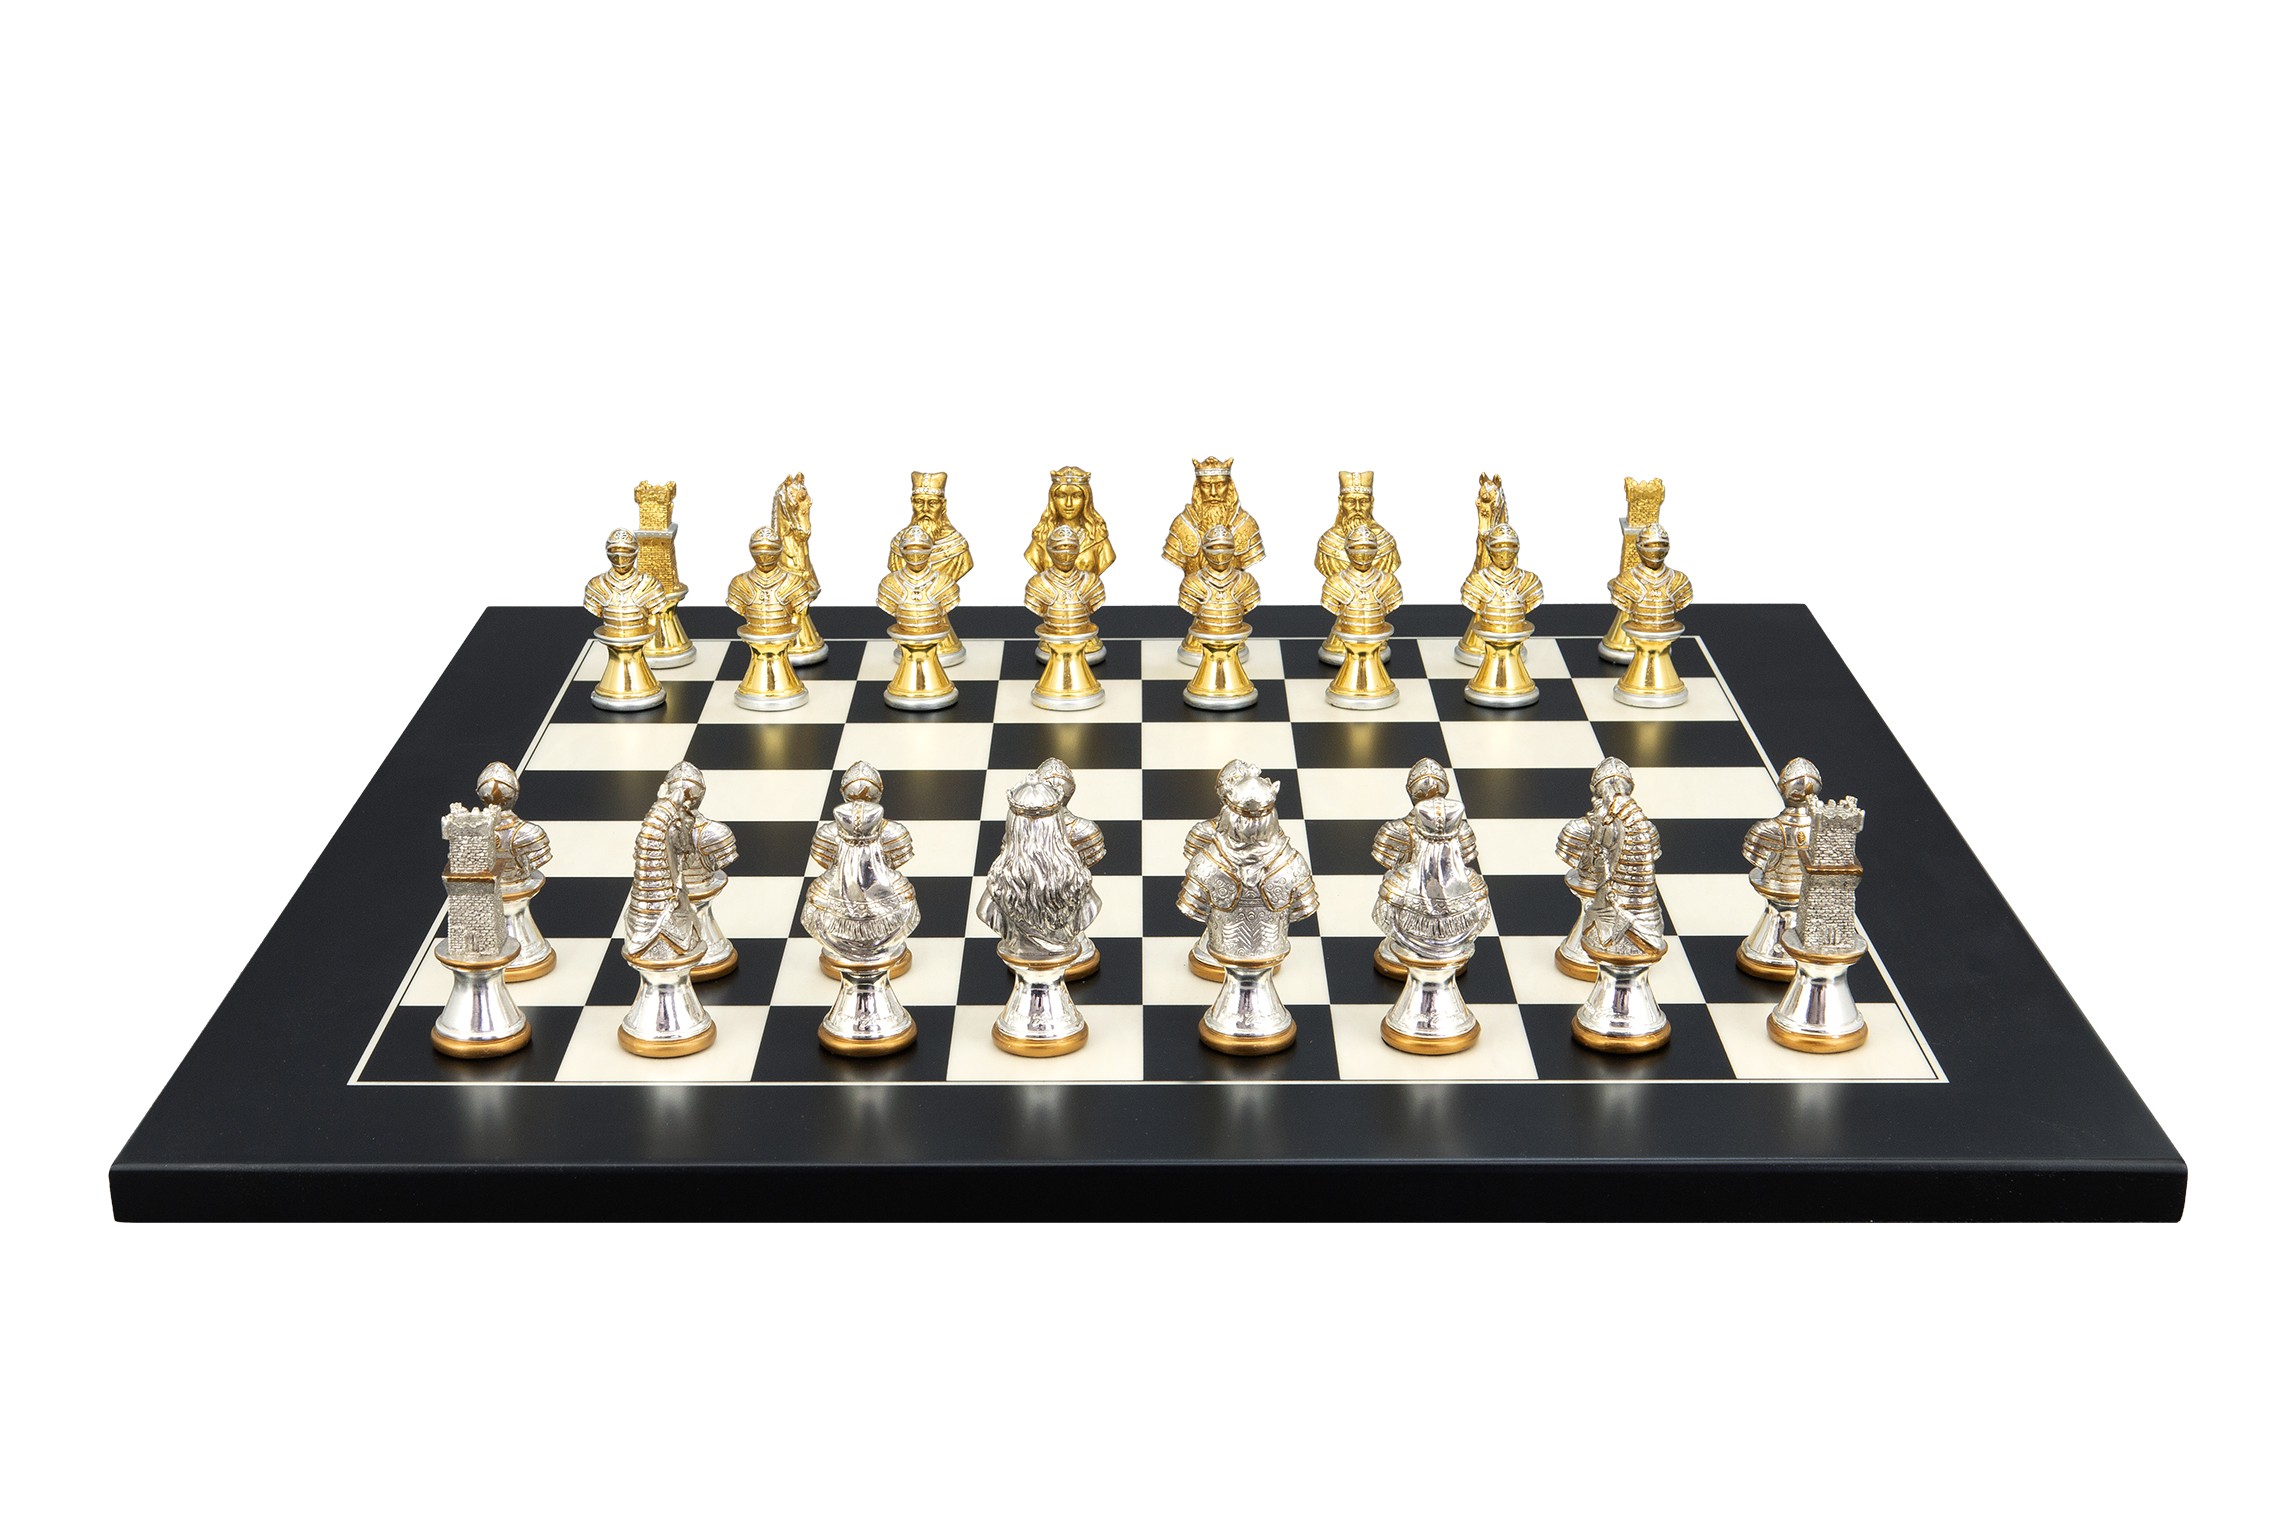 Dal Rossi Italy, Medieval Warriors Metal Chessmen 85mm on a Black / Erable, 50cm Chess Board